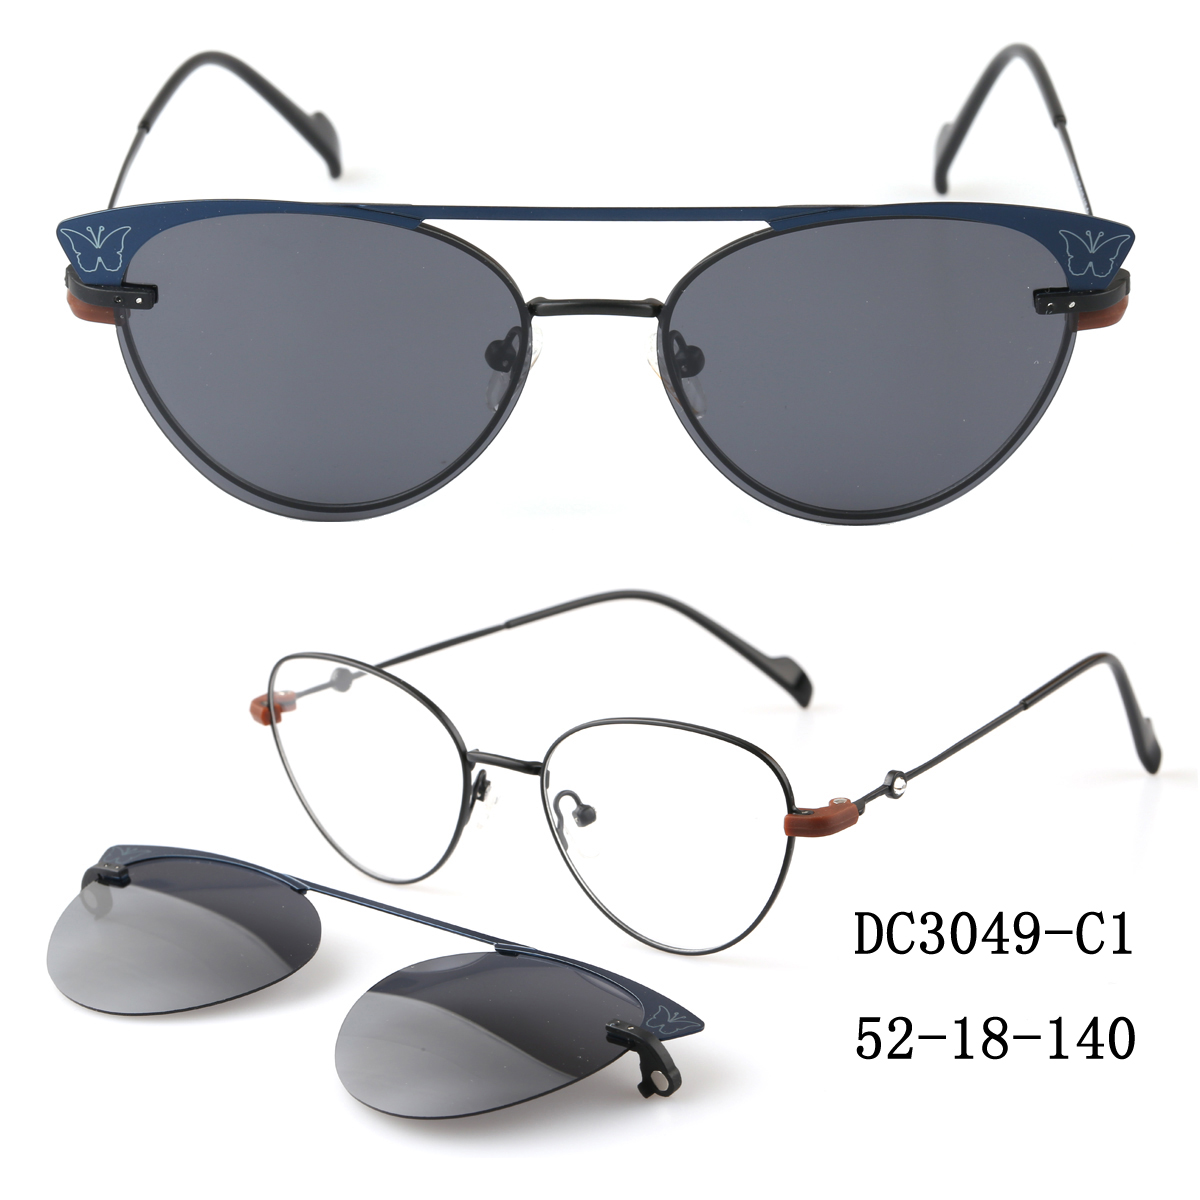 Clip On Shades For Glasses Wholesale, Oem Odm Clip On Sunglasses Shades